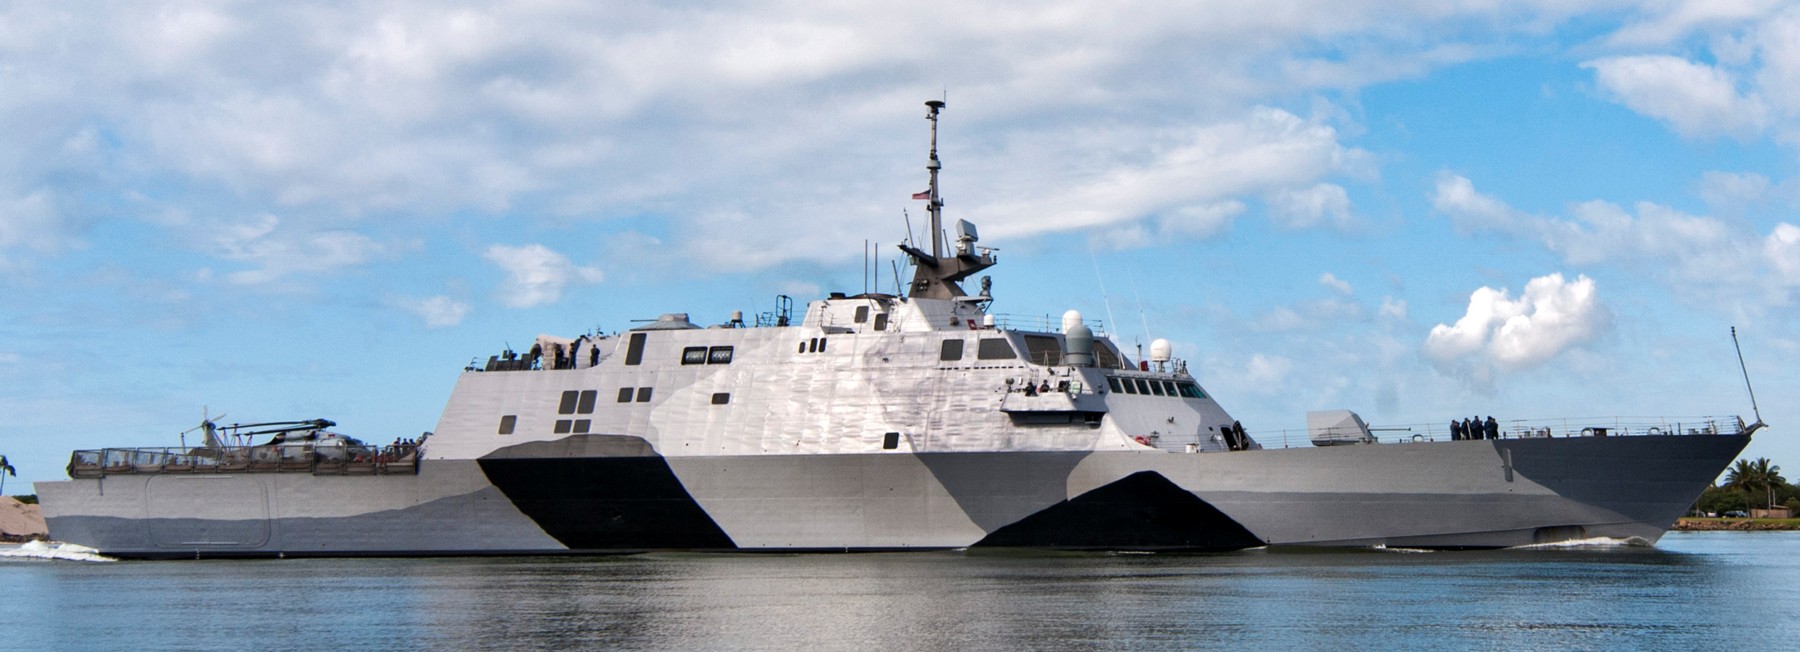 lcs-1 uss freedom class littoral combat ship us navy 43